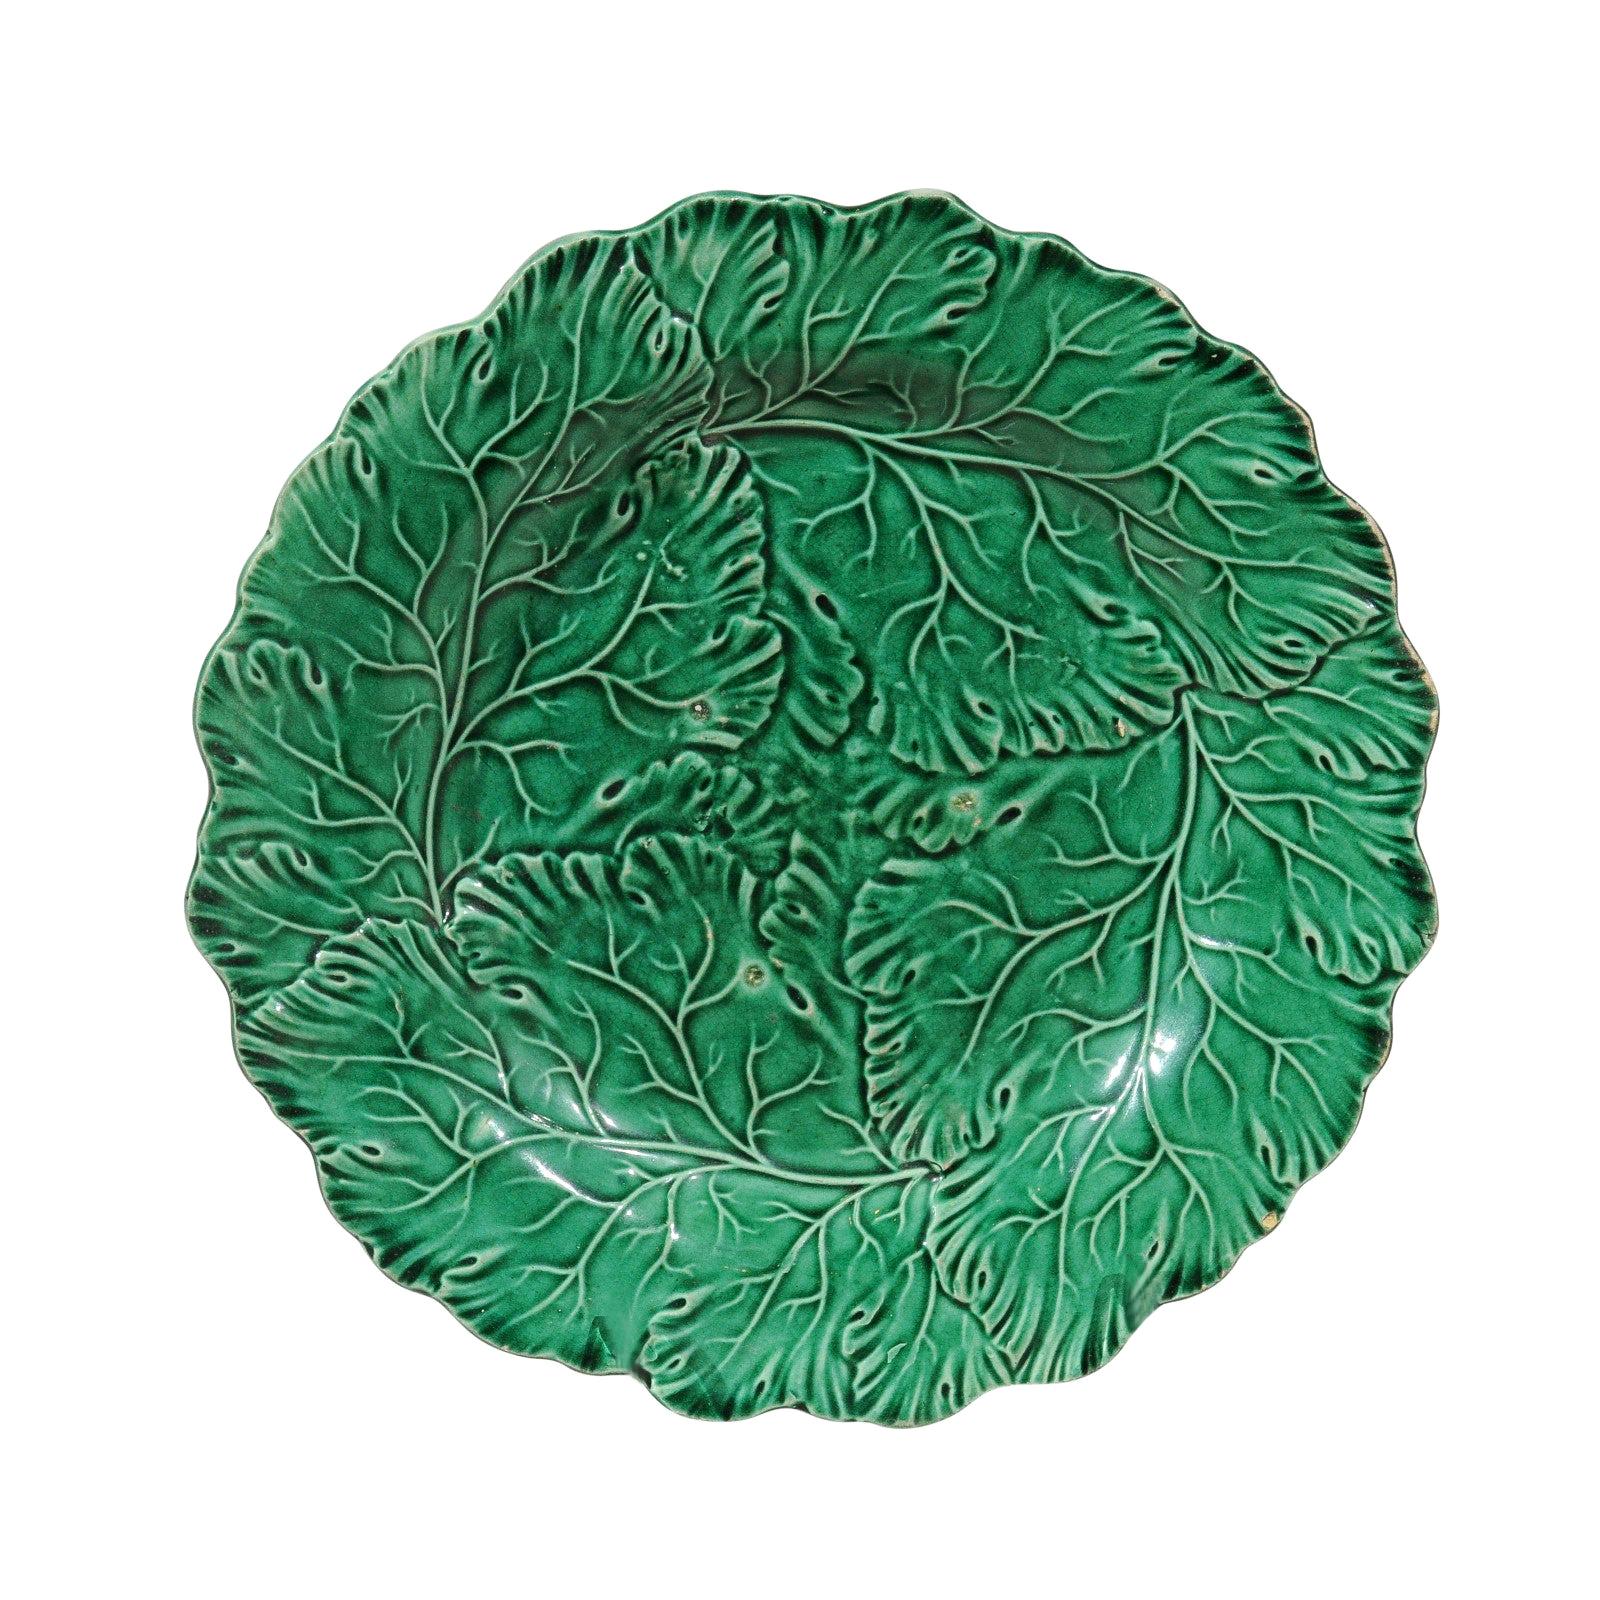 French Green Majolica Leaf Plate with Scalloped Edge from the Late 19th Century